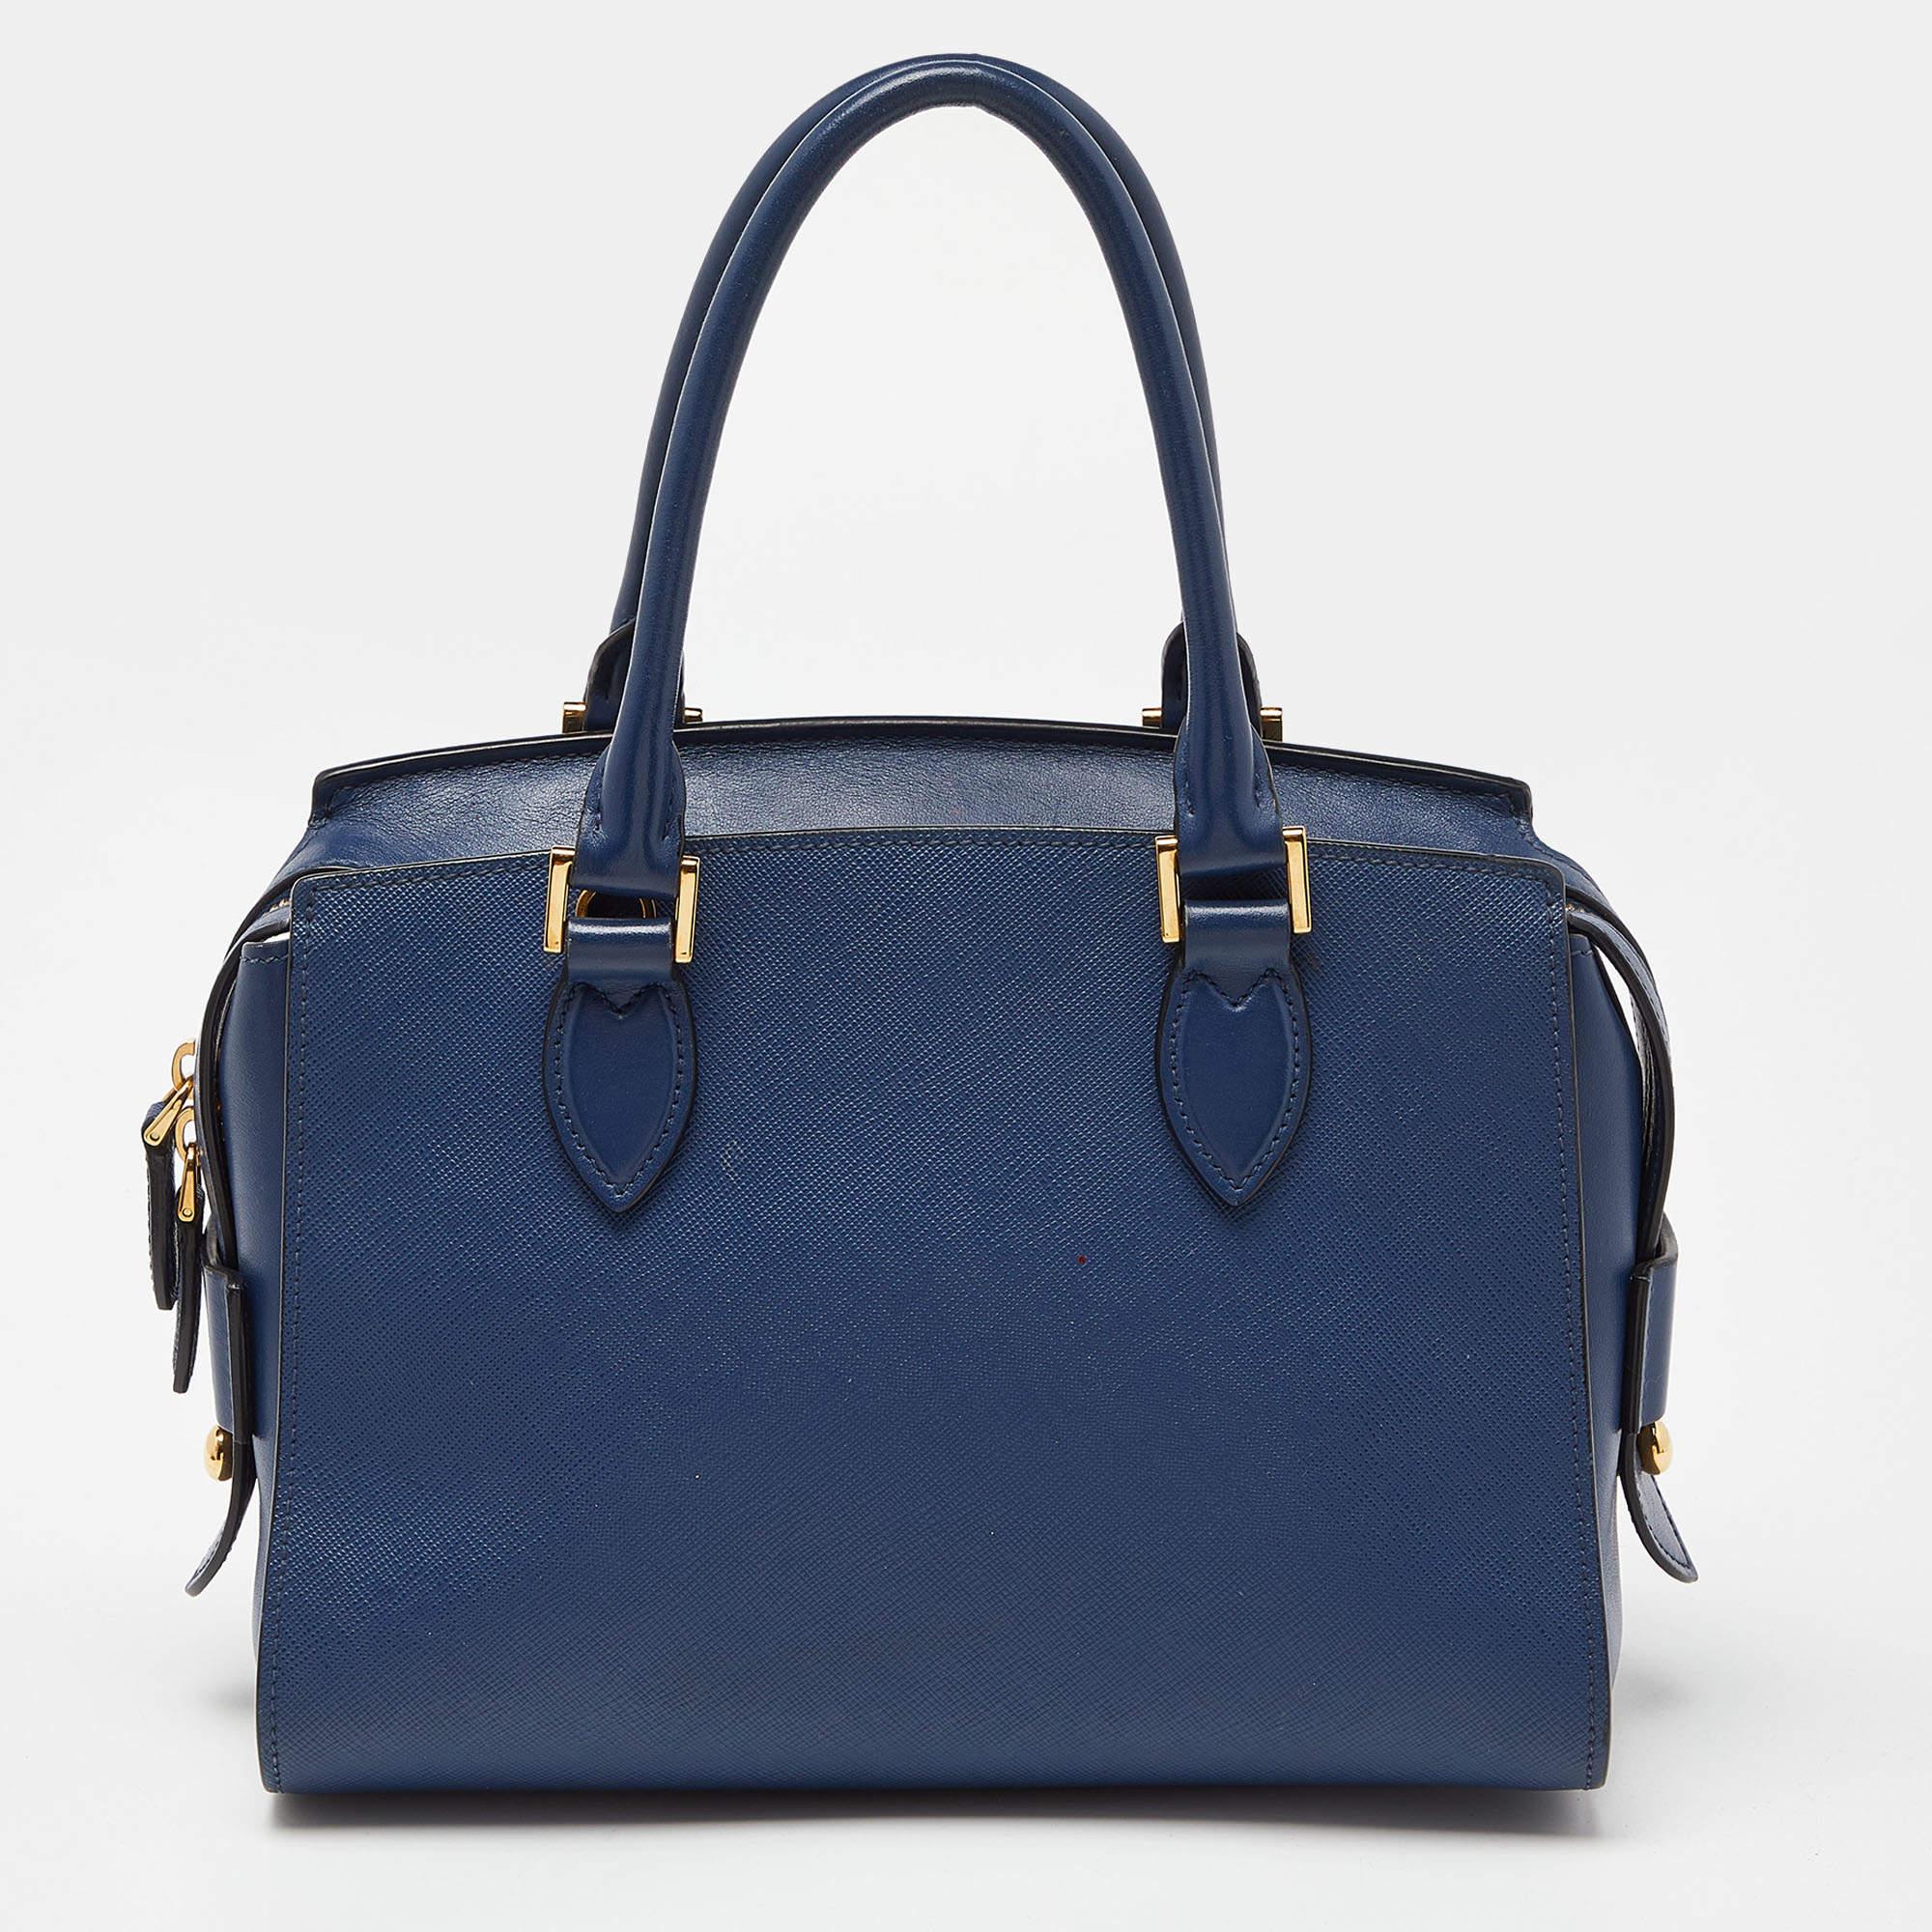 Thoughtful details, high quality, and everyday convenience mark this designer bag for women by Prada. The bag is sewn with skill to deliver a refined look and an impeccable finish.

Includes: Authenticity Card, Info Card, Info Booklet, Detachable